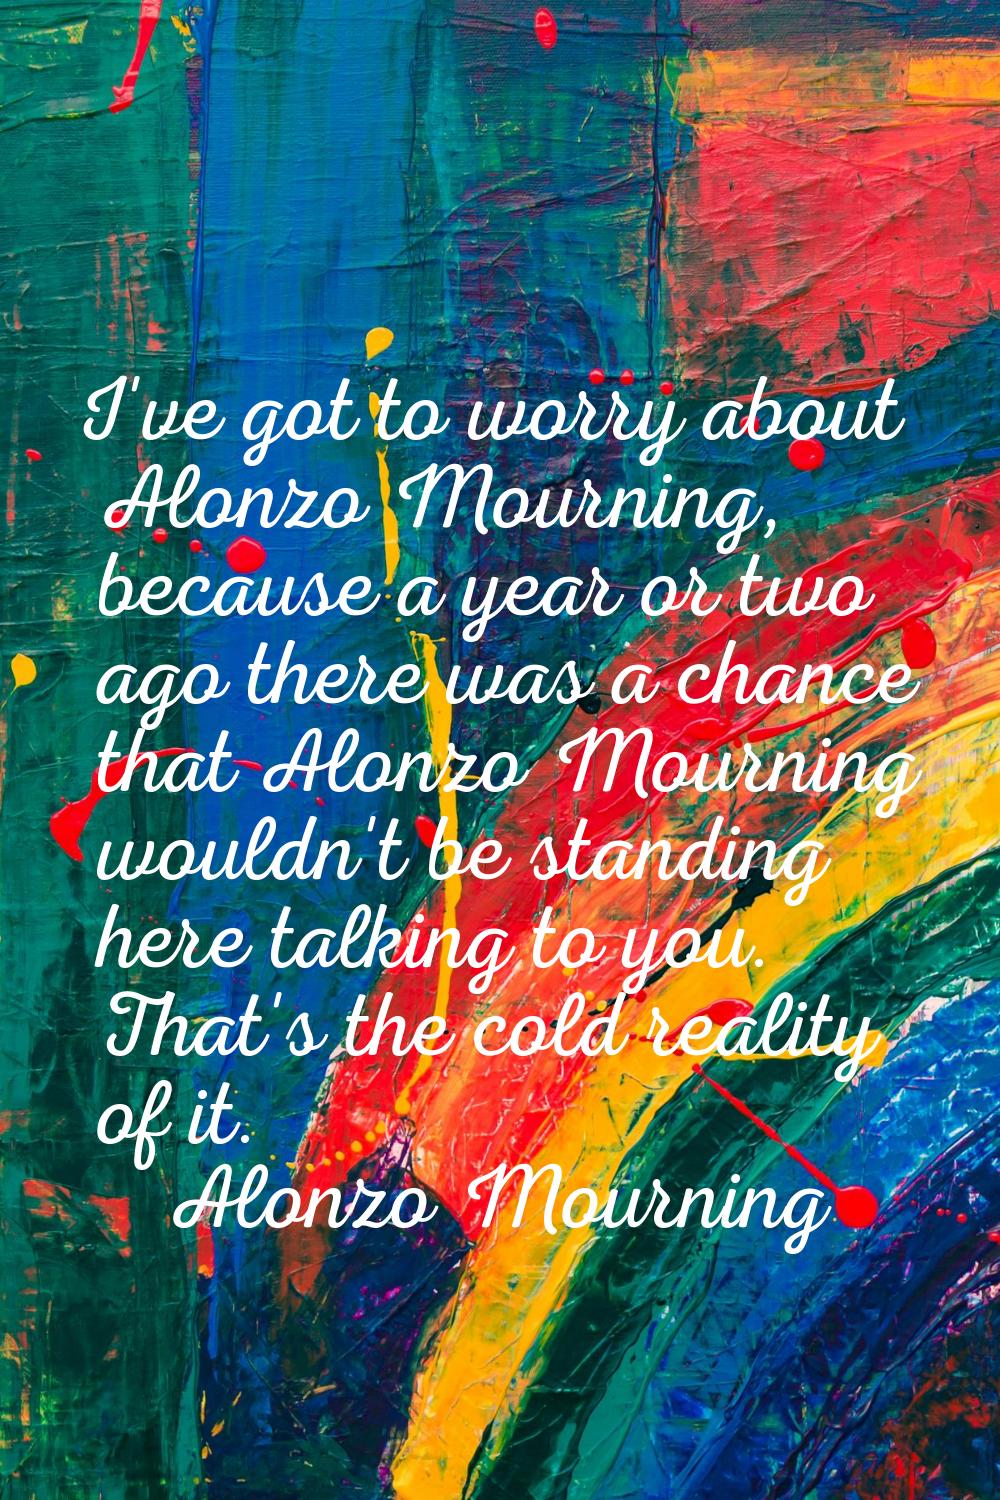 I've got to worry about Alonzo Mourning, because a year or two ago there was a chance that Alonzo M